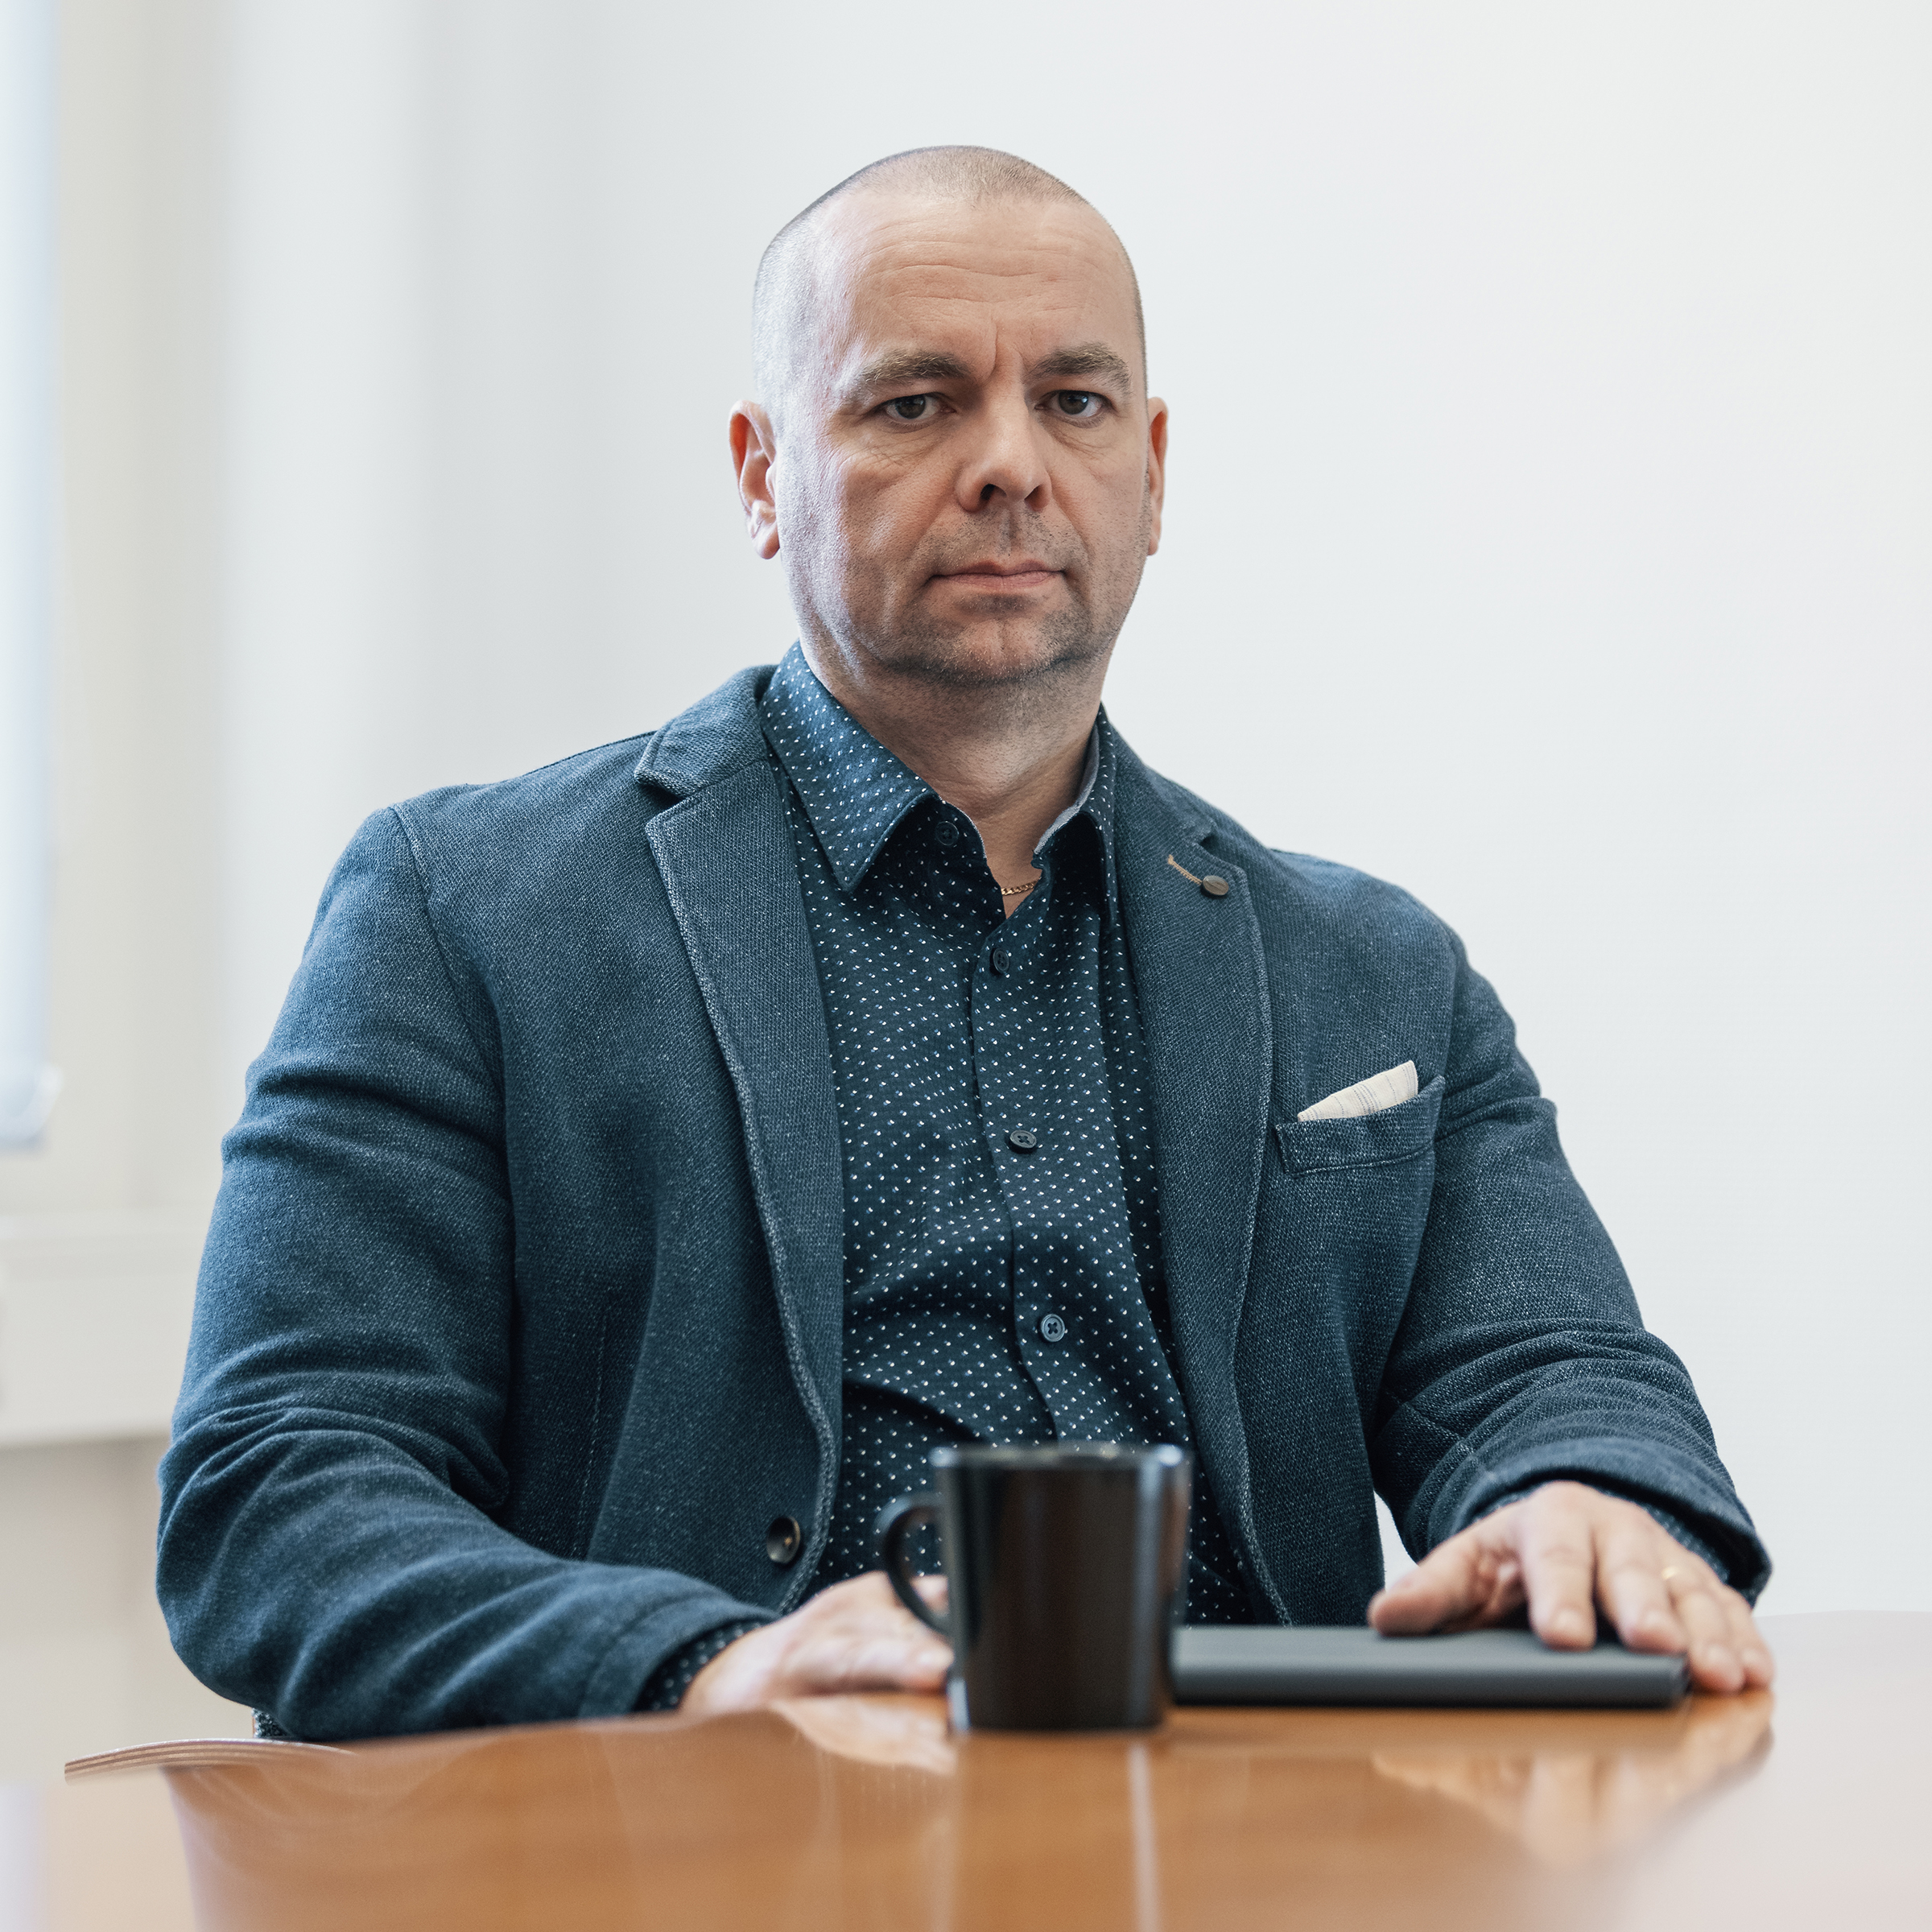 Åke Nyblom has been appointed Managing Director of Ahola Transport